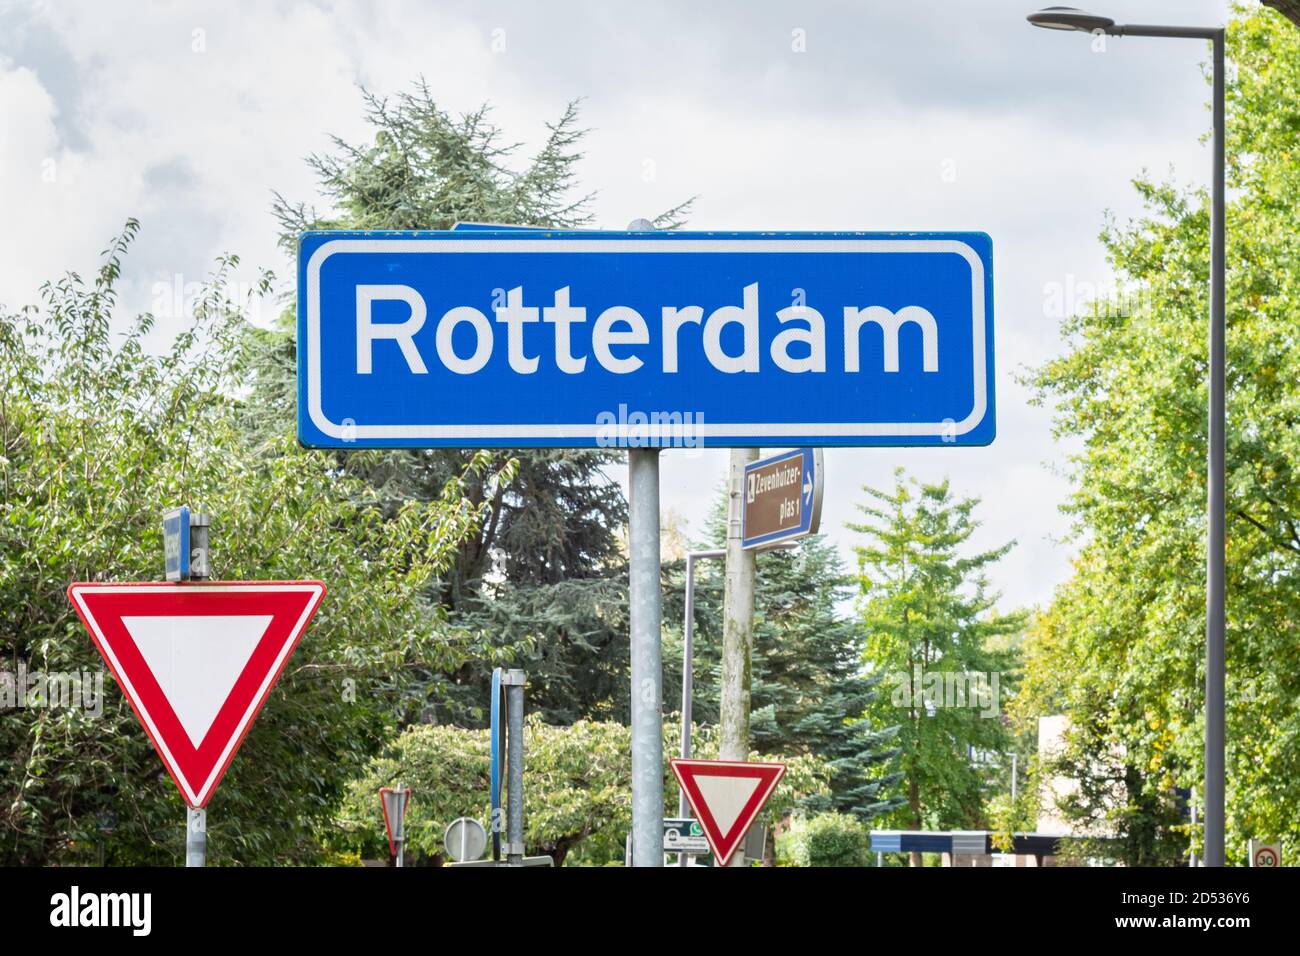 Place name sign of the city of Rotterdam, Netherlands Stock Photo